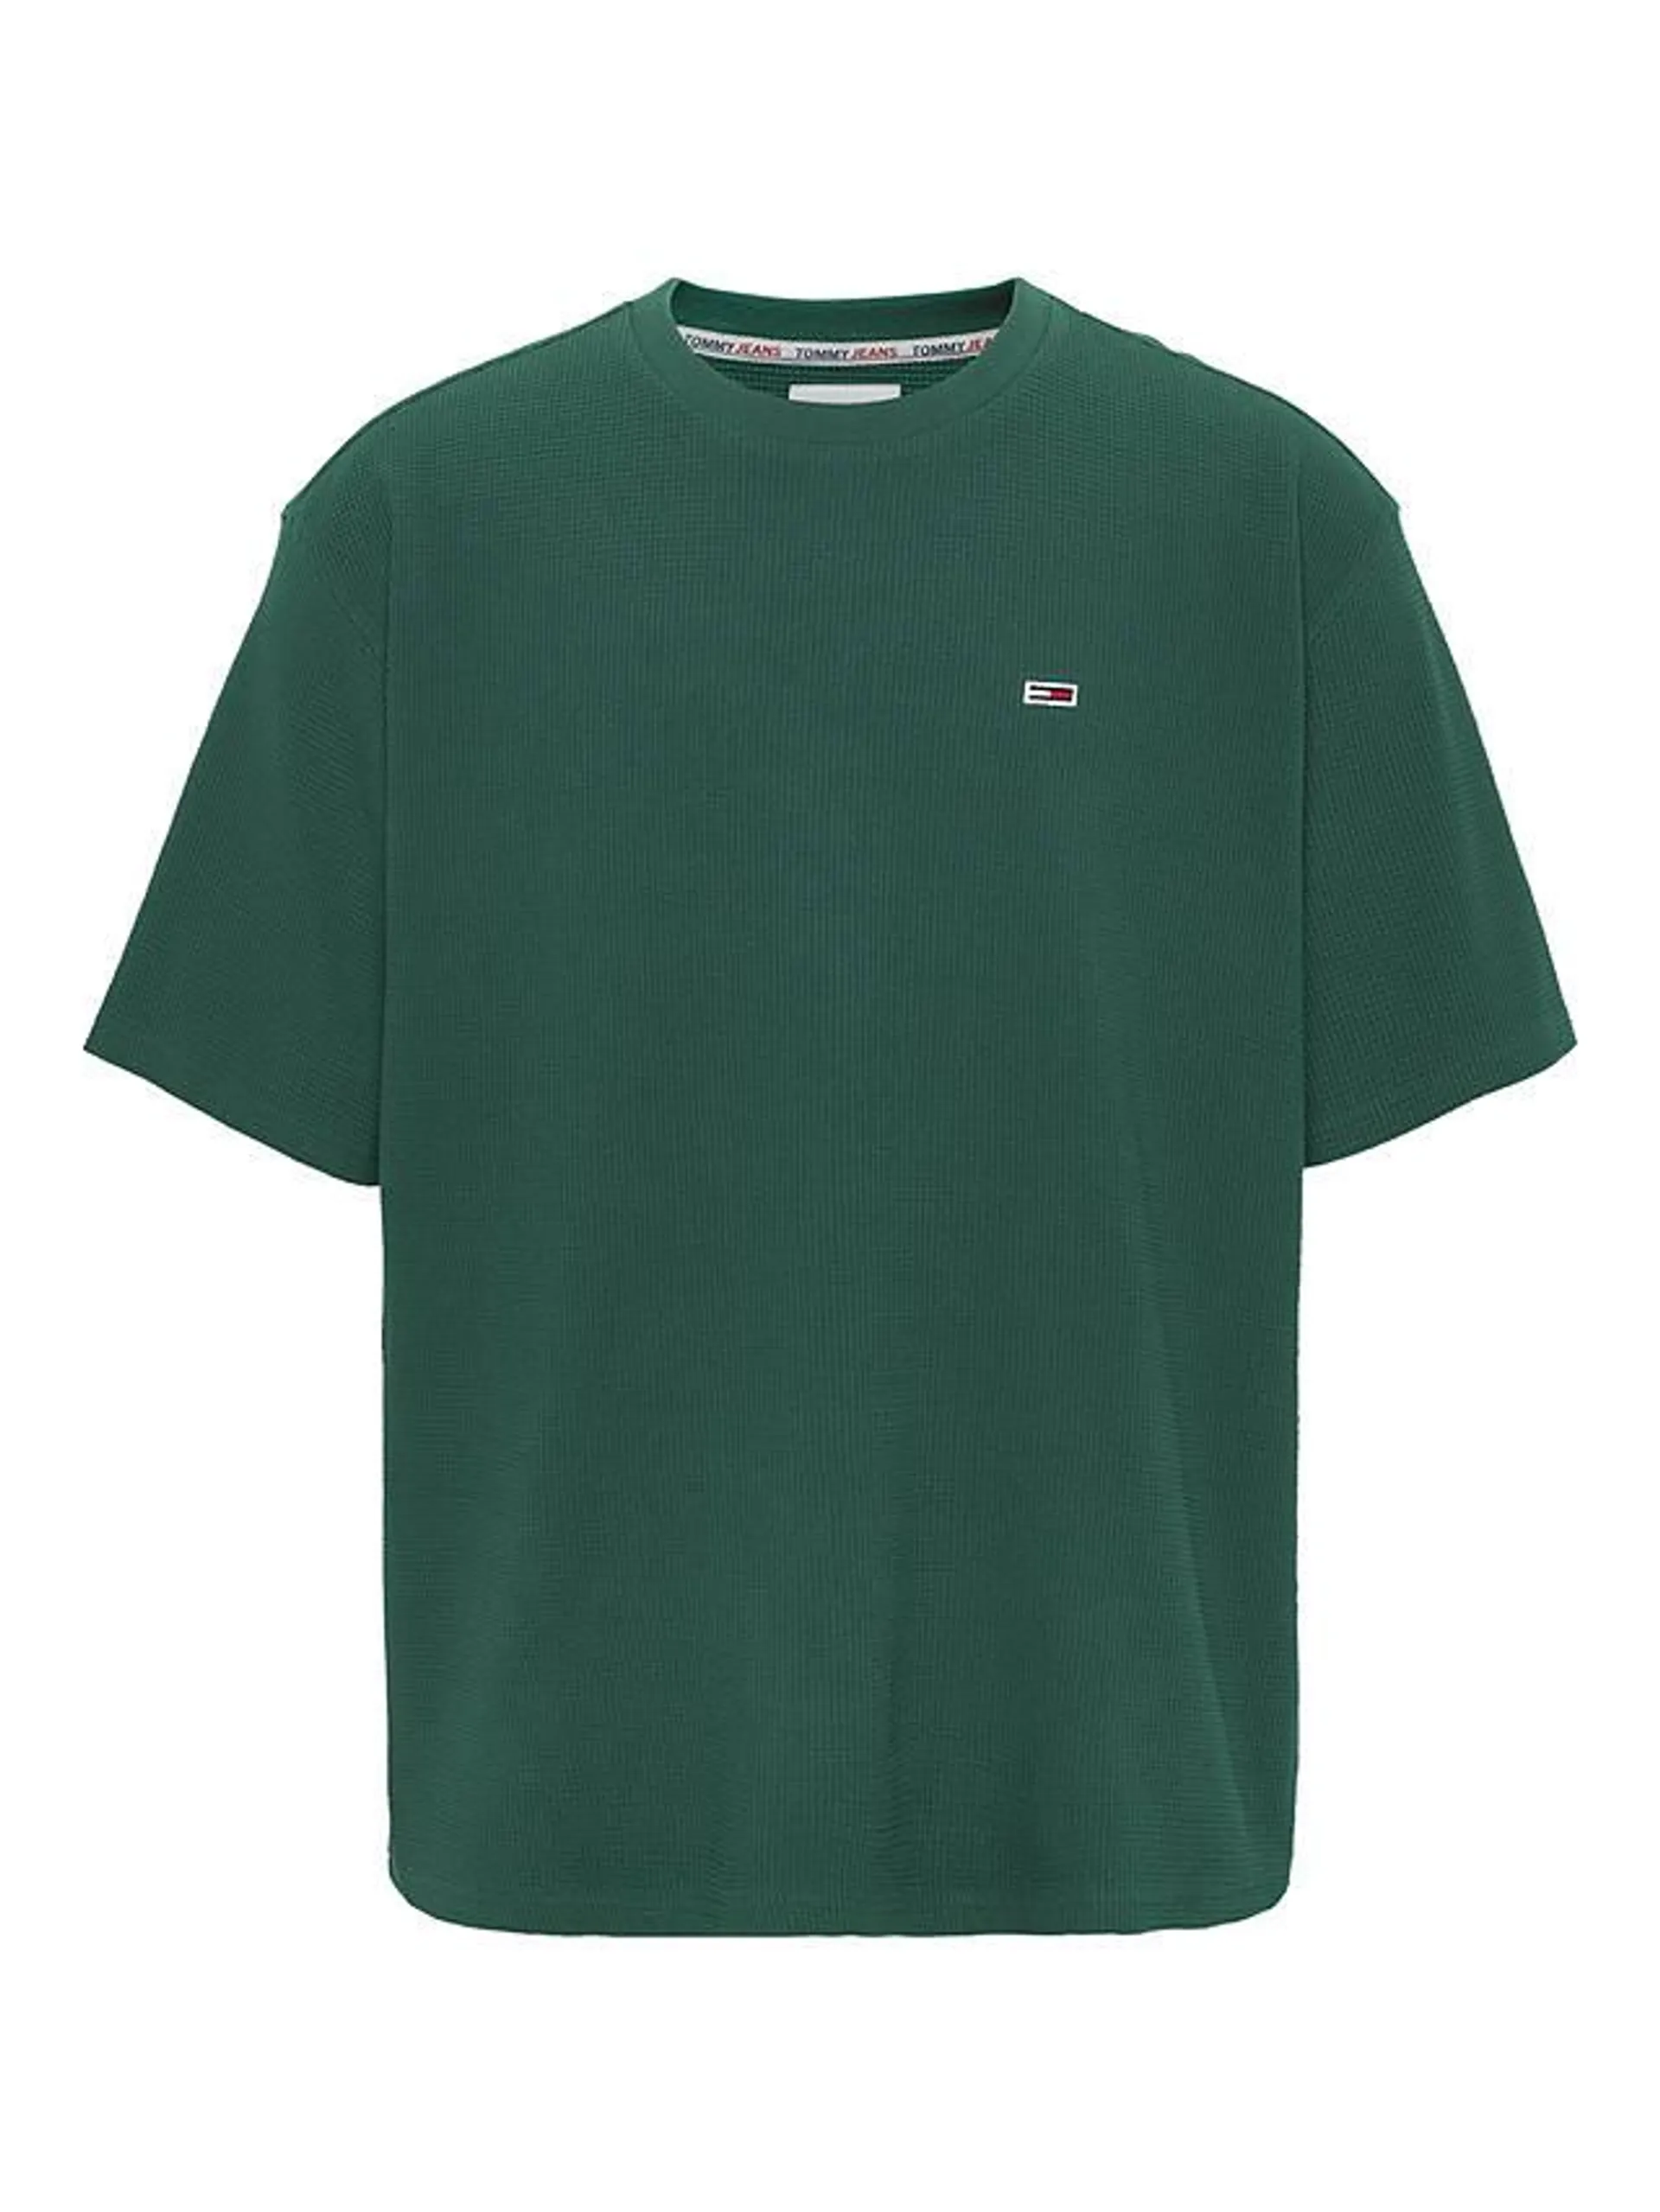 Tommy Jeans Skater Waffle T-Shirt, Dark Turf Green